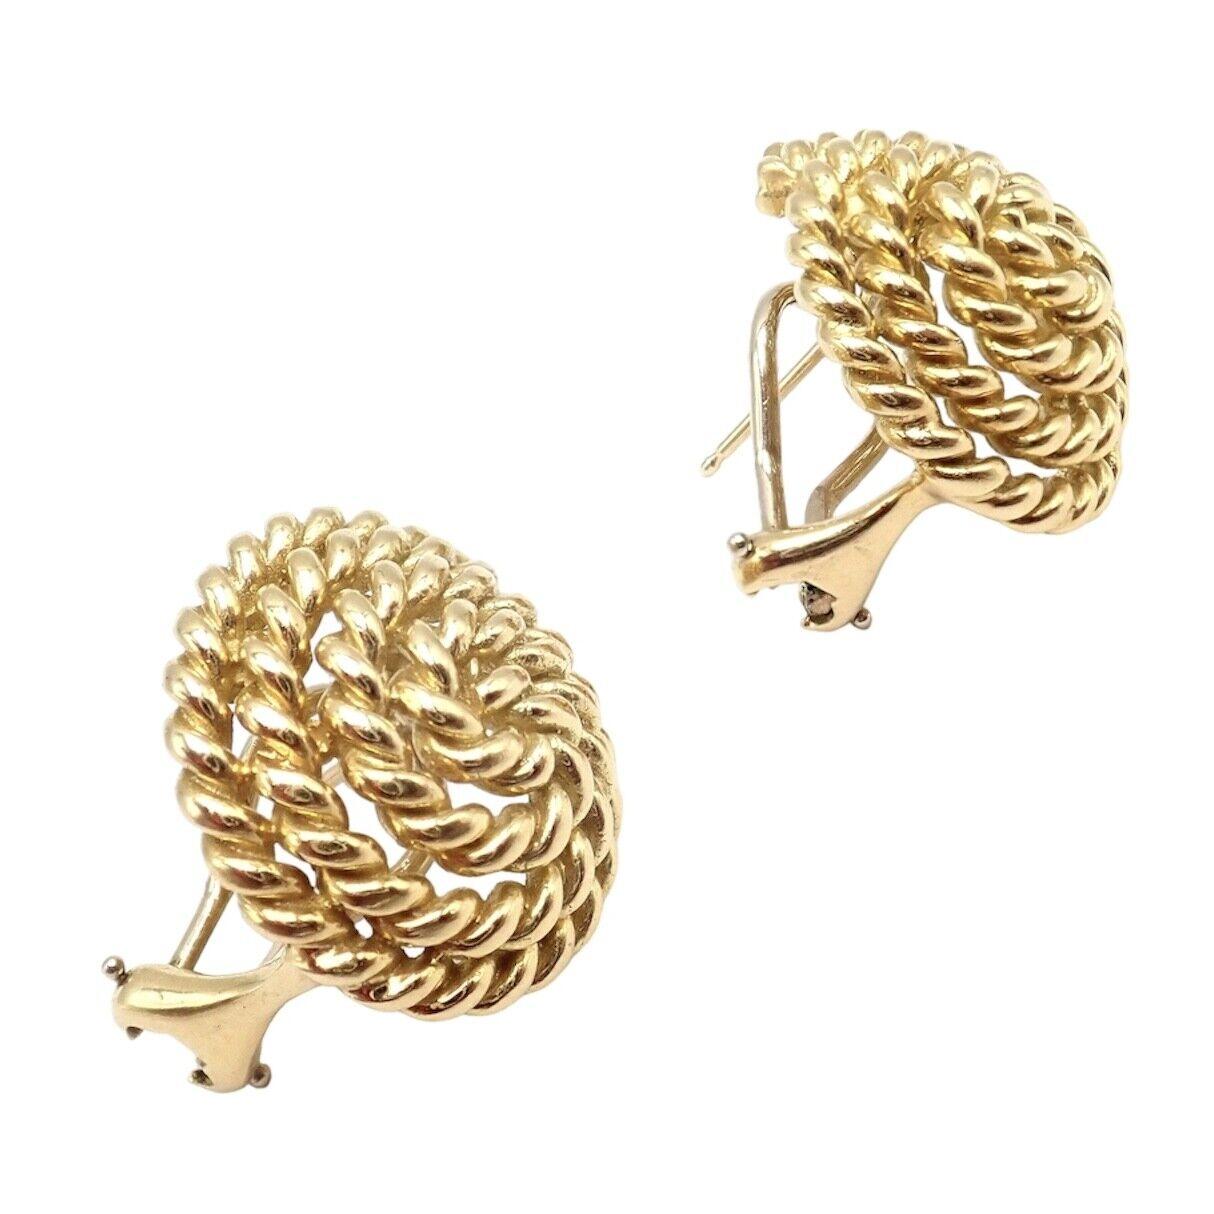 18k Yellow Gold Vintage Large Coiled Rope Earrings by Tiffany & Co. 
These earrings are made for pierced ears.
Details: 
Weight: 20.1 grams
Measurements: 20mm x 20mm
Stamped Hallmarks: Tiffany&Co 18k
YOUR PRICE: $3,850
Ti947mhtd
